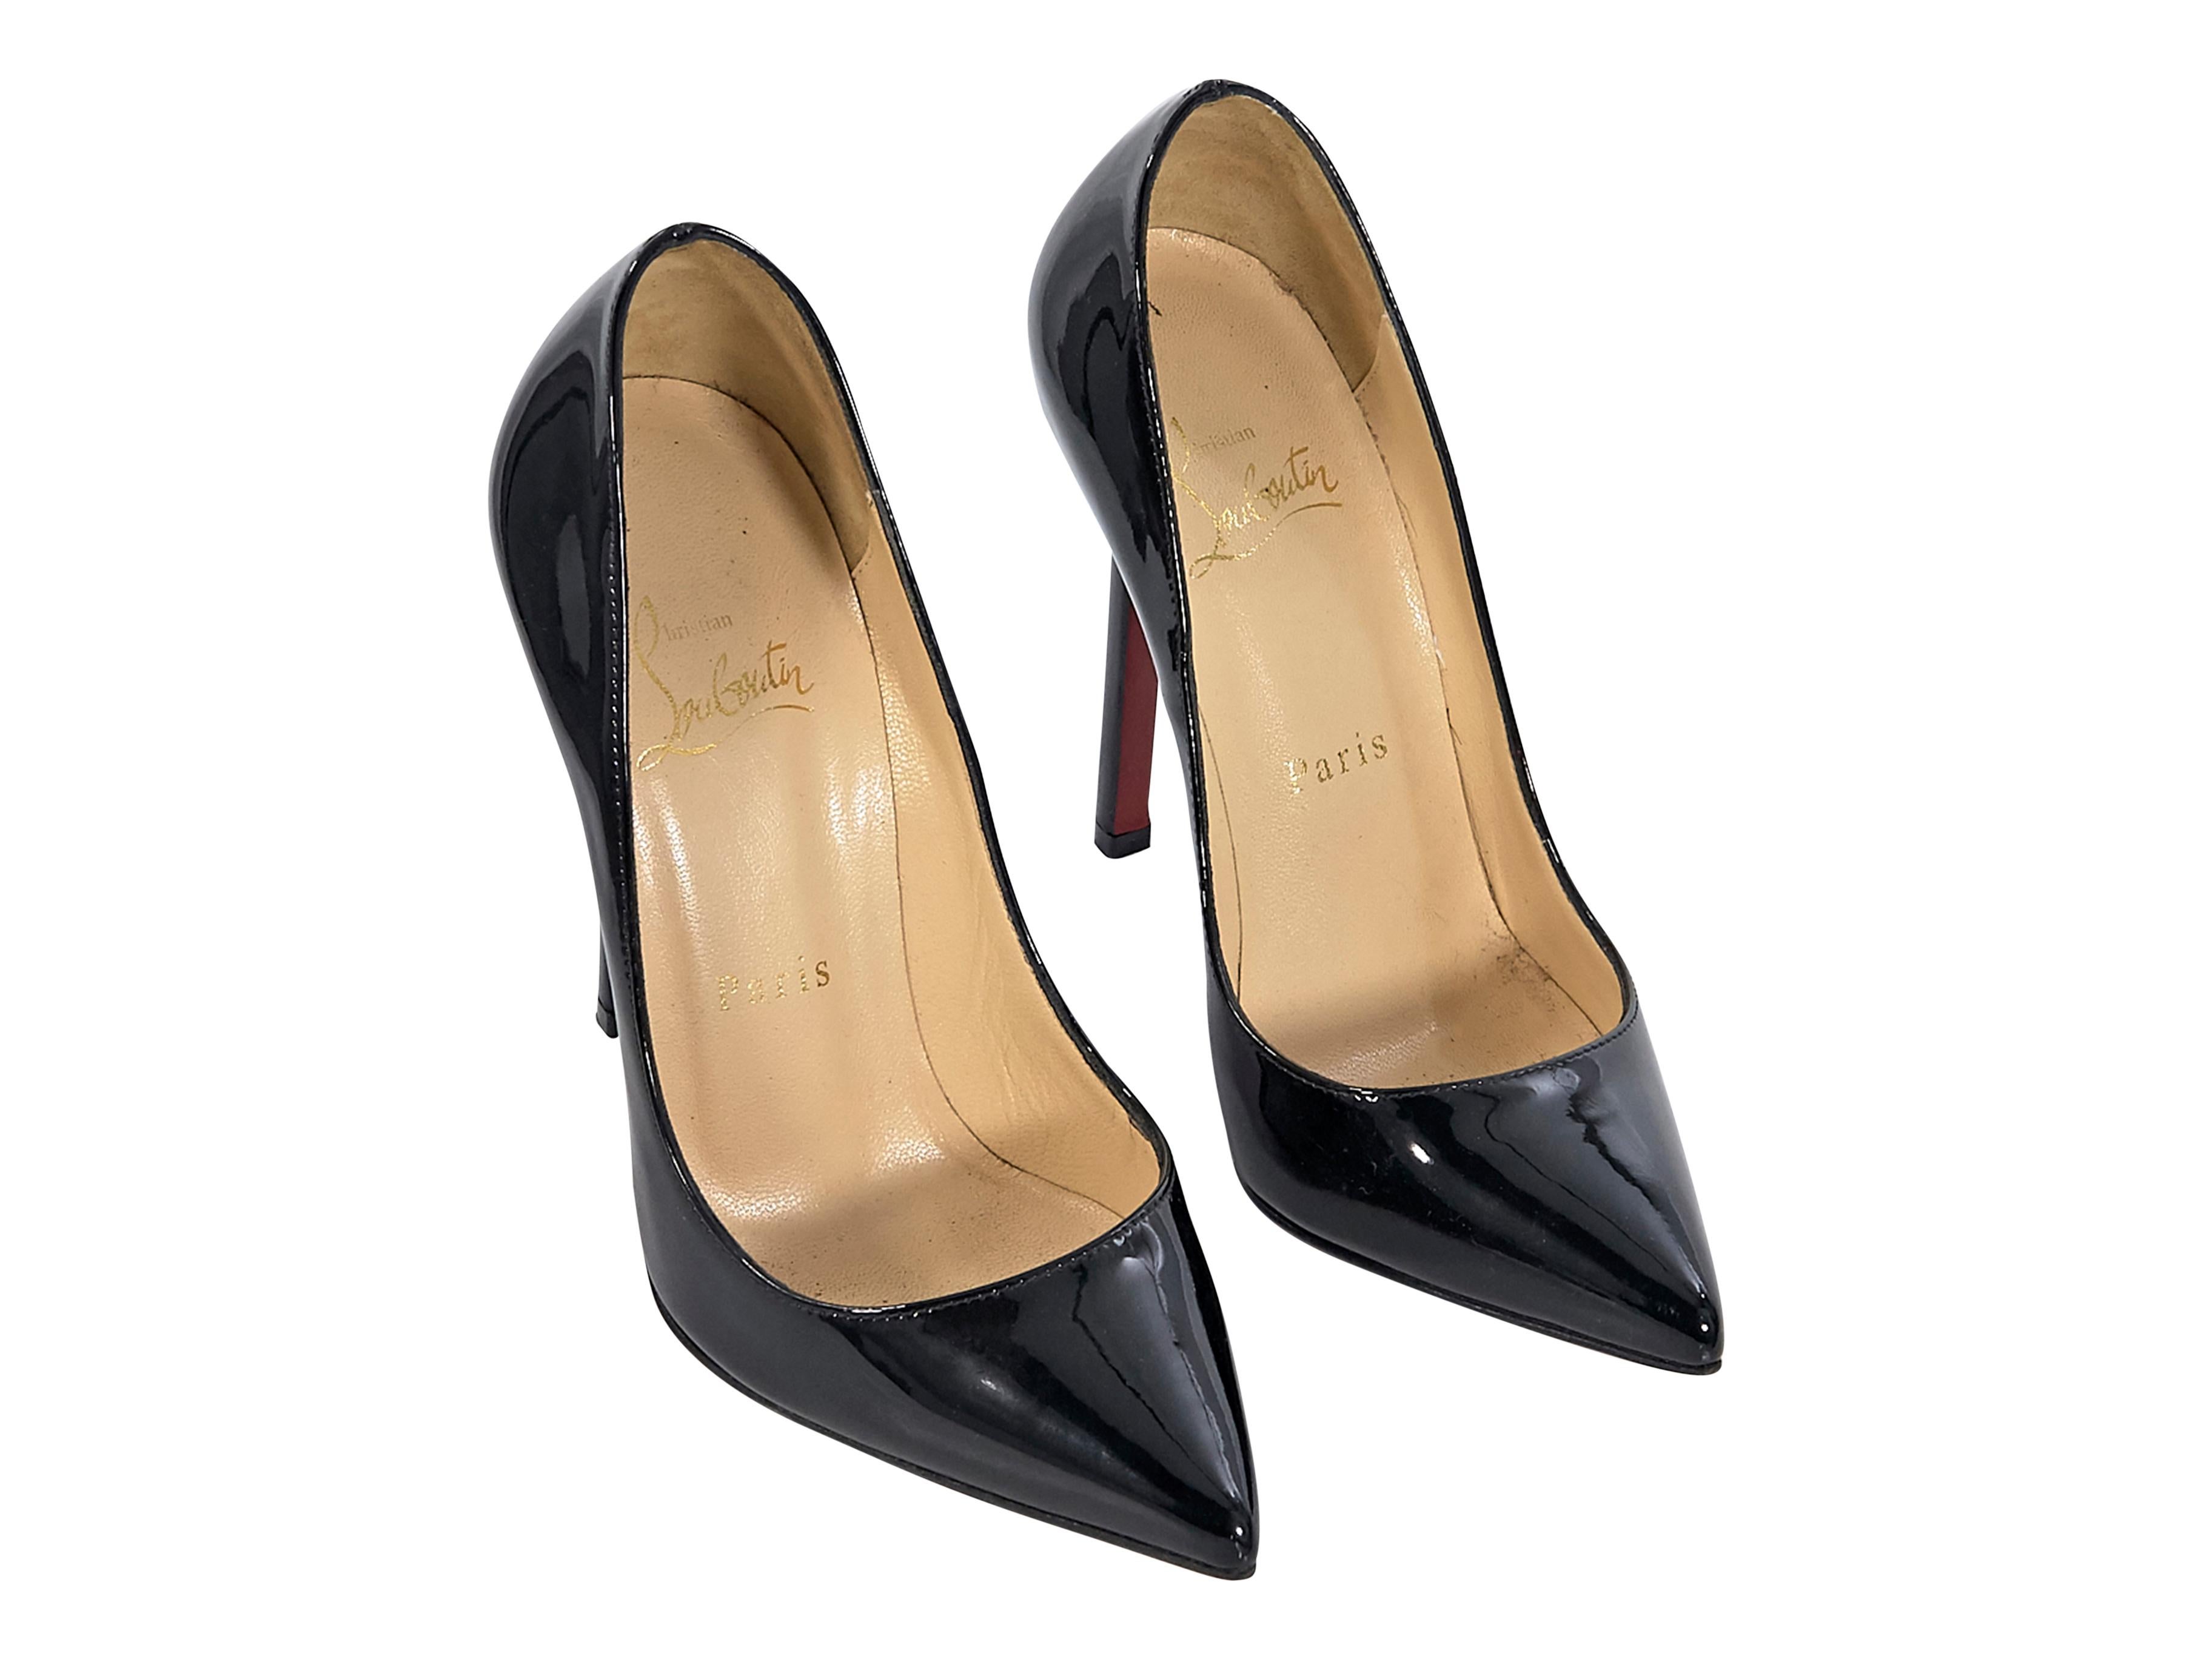 Product details: Black patent leather pumps by Christian Louboutin.  Point toe.  Slip-on style.  4.5